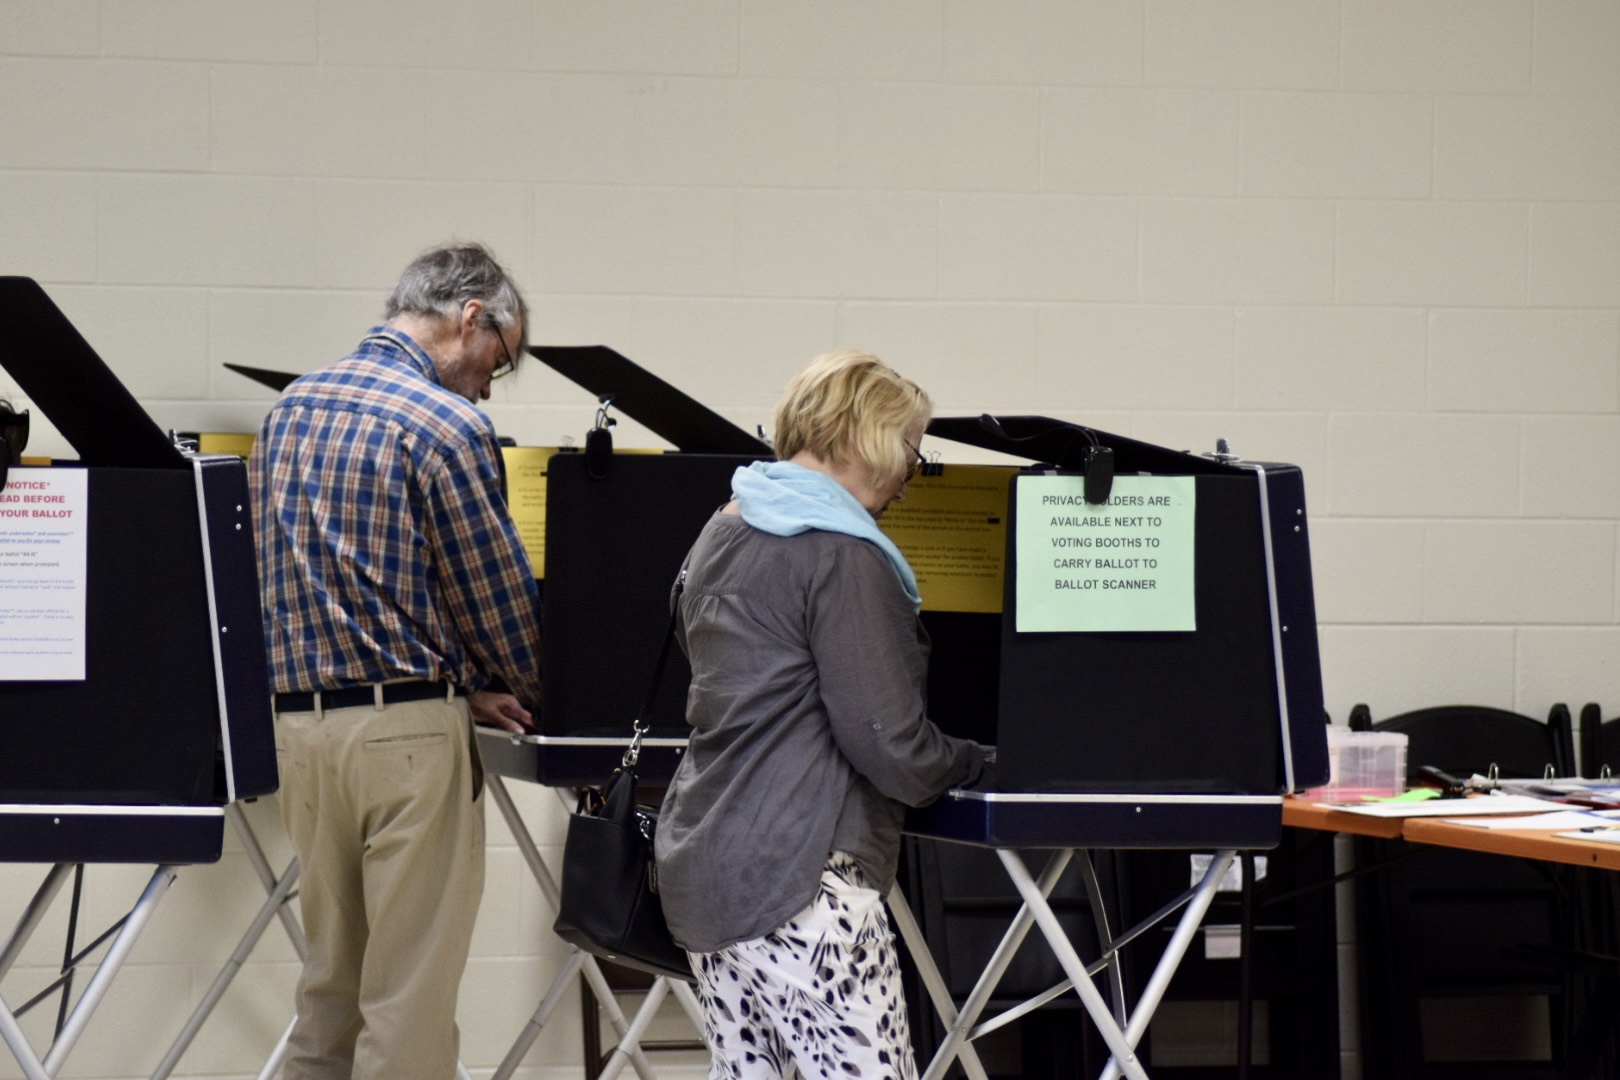 Two people vote at voting booths.